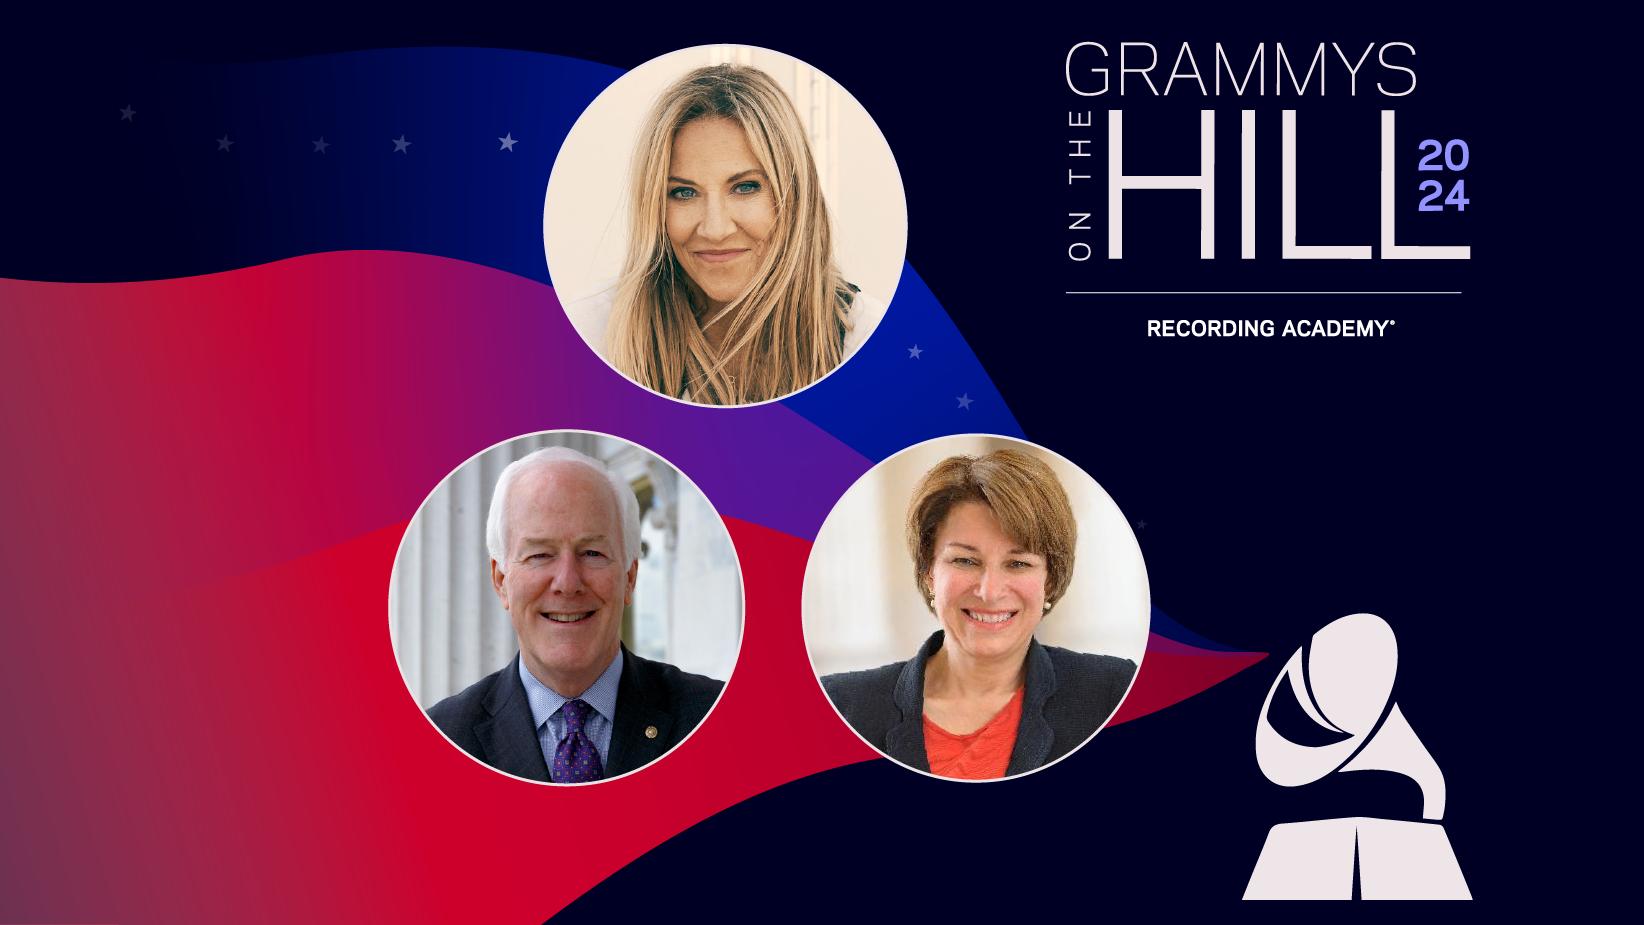 Collage featuring photos of (L-R) Sen. John Cornyn, Sheryl Crow and Sen. Amy Klobuchar. The graphic features key art featuring the words GRAMMYs On The Hill Awards 2024 and the Recording Academy logo and a GRAMMY Award statue.